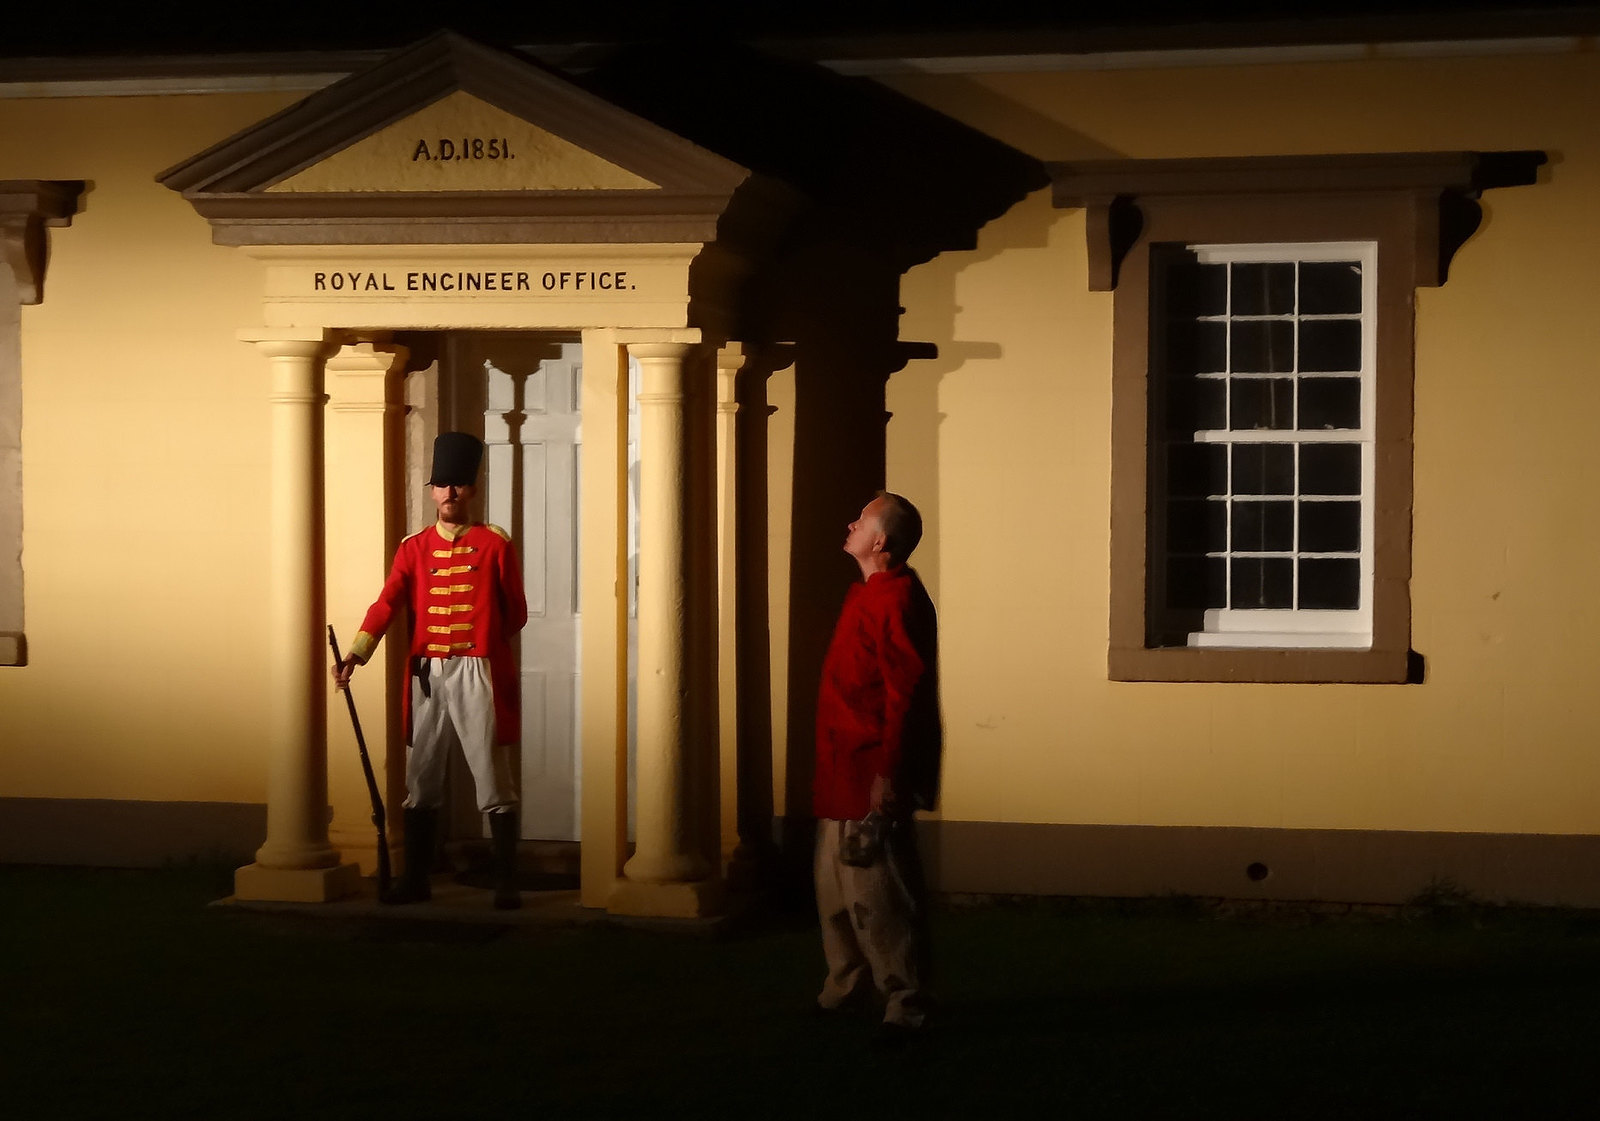 Sound and Light Show on Norfolk Island telling tales of the convict era. Image credit denisbin